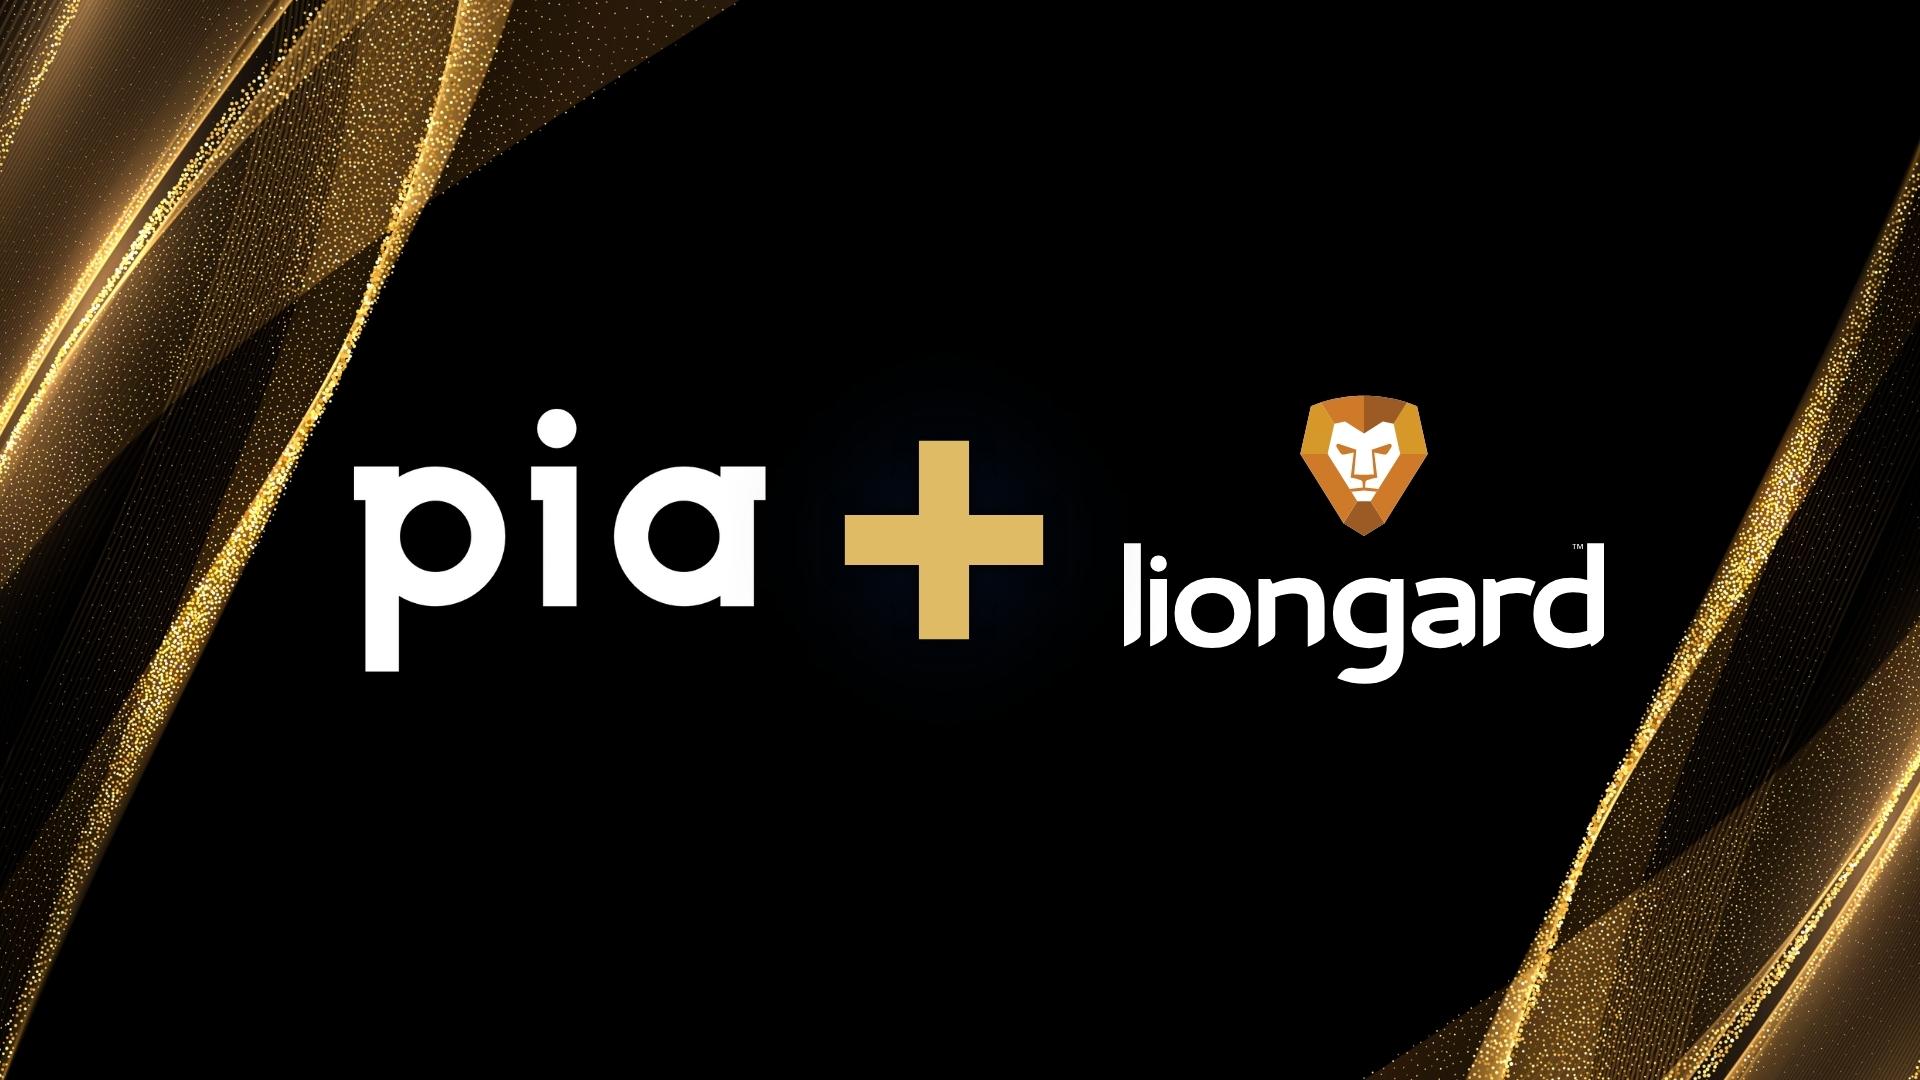 Pia Lionguard prioritizes data protection and AI for a secure solution